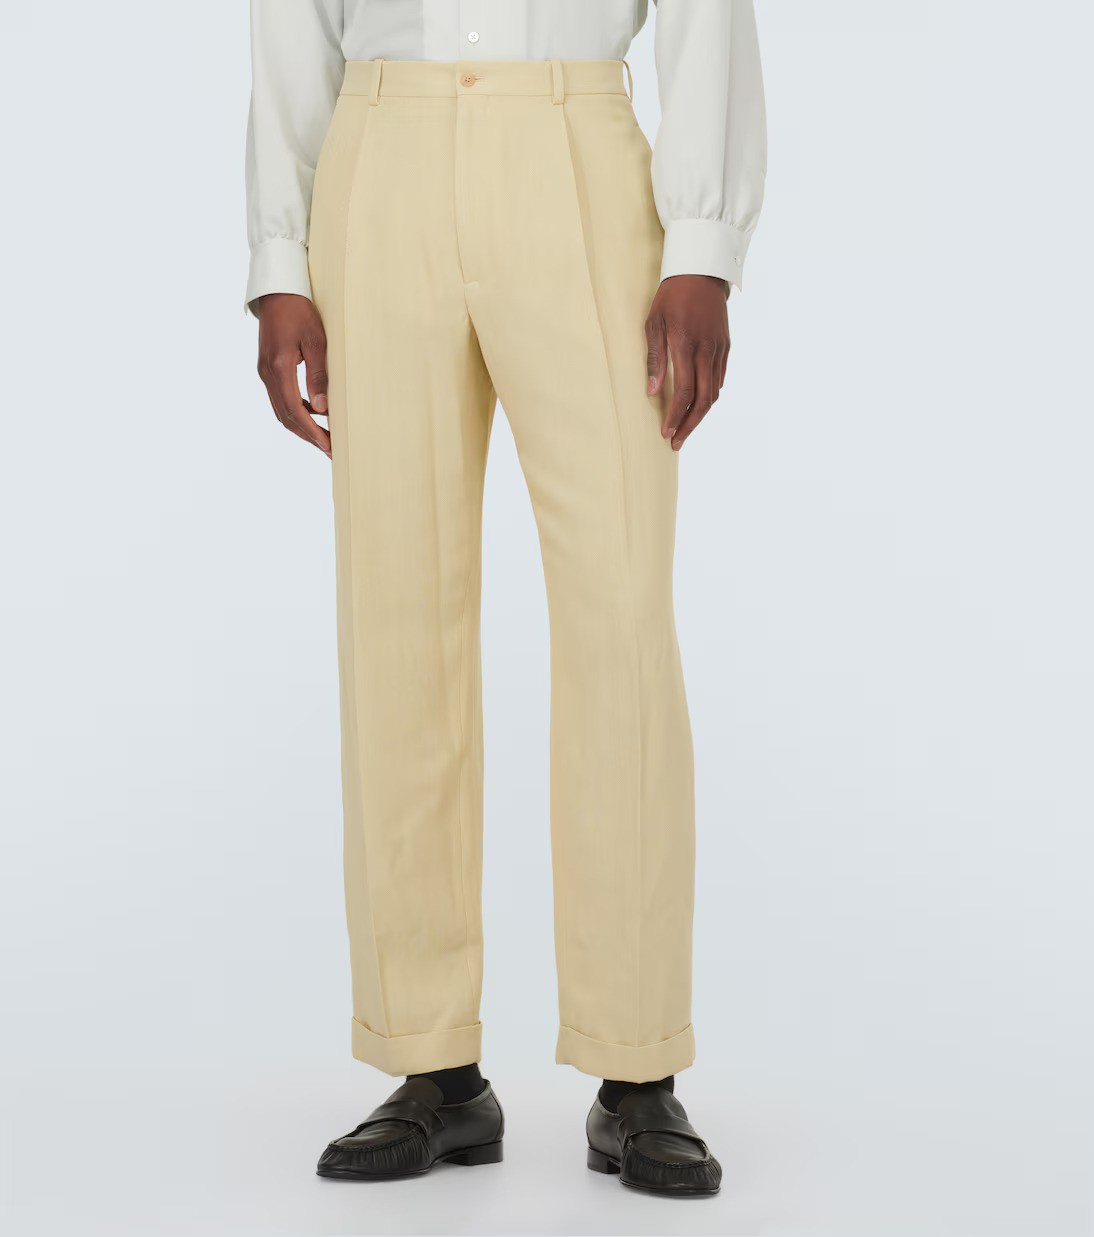 high-waisted-pants-for-men-style-rave